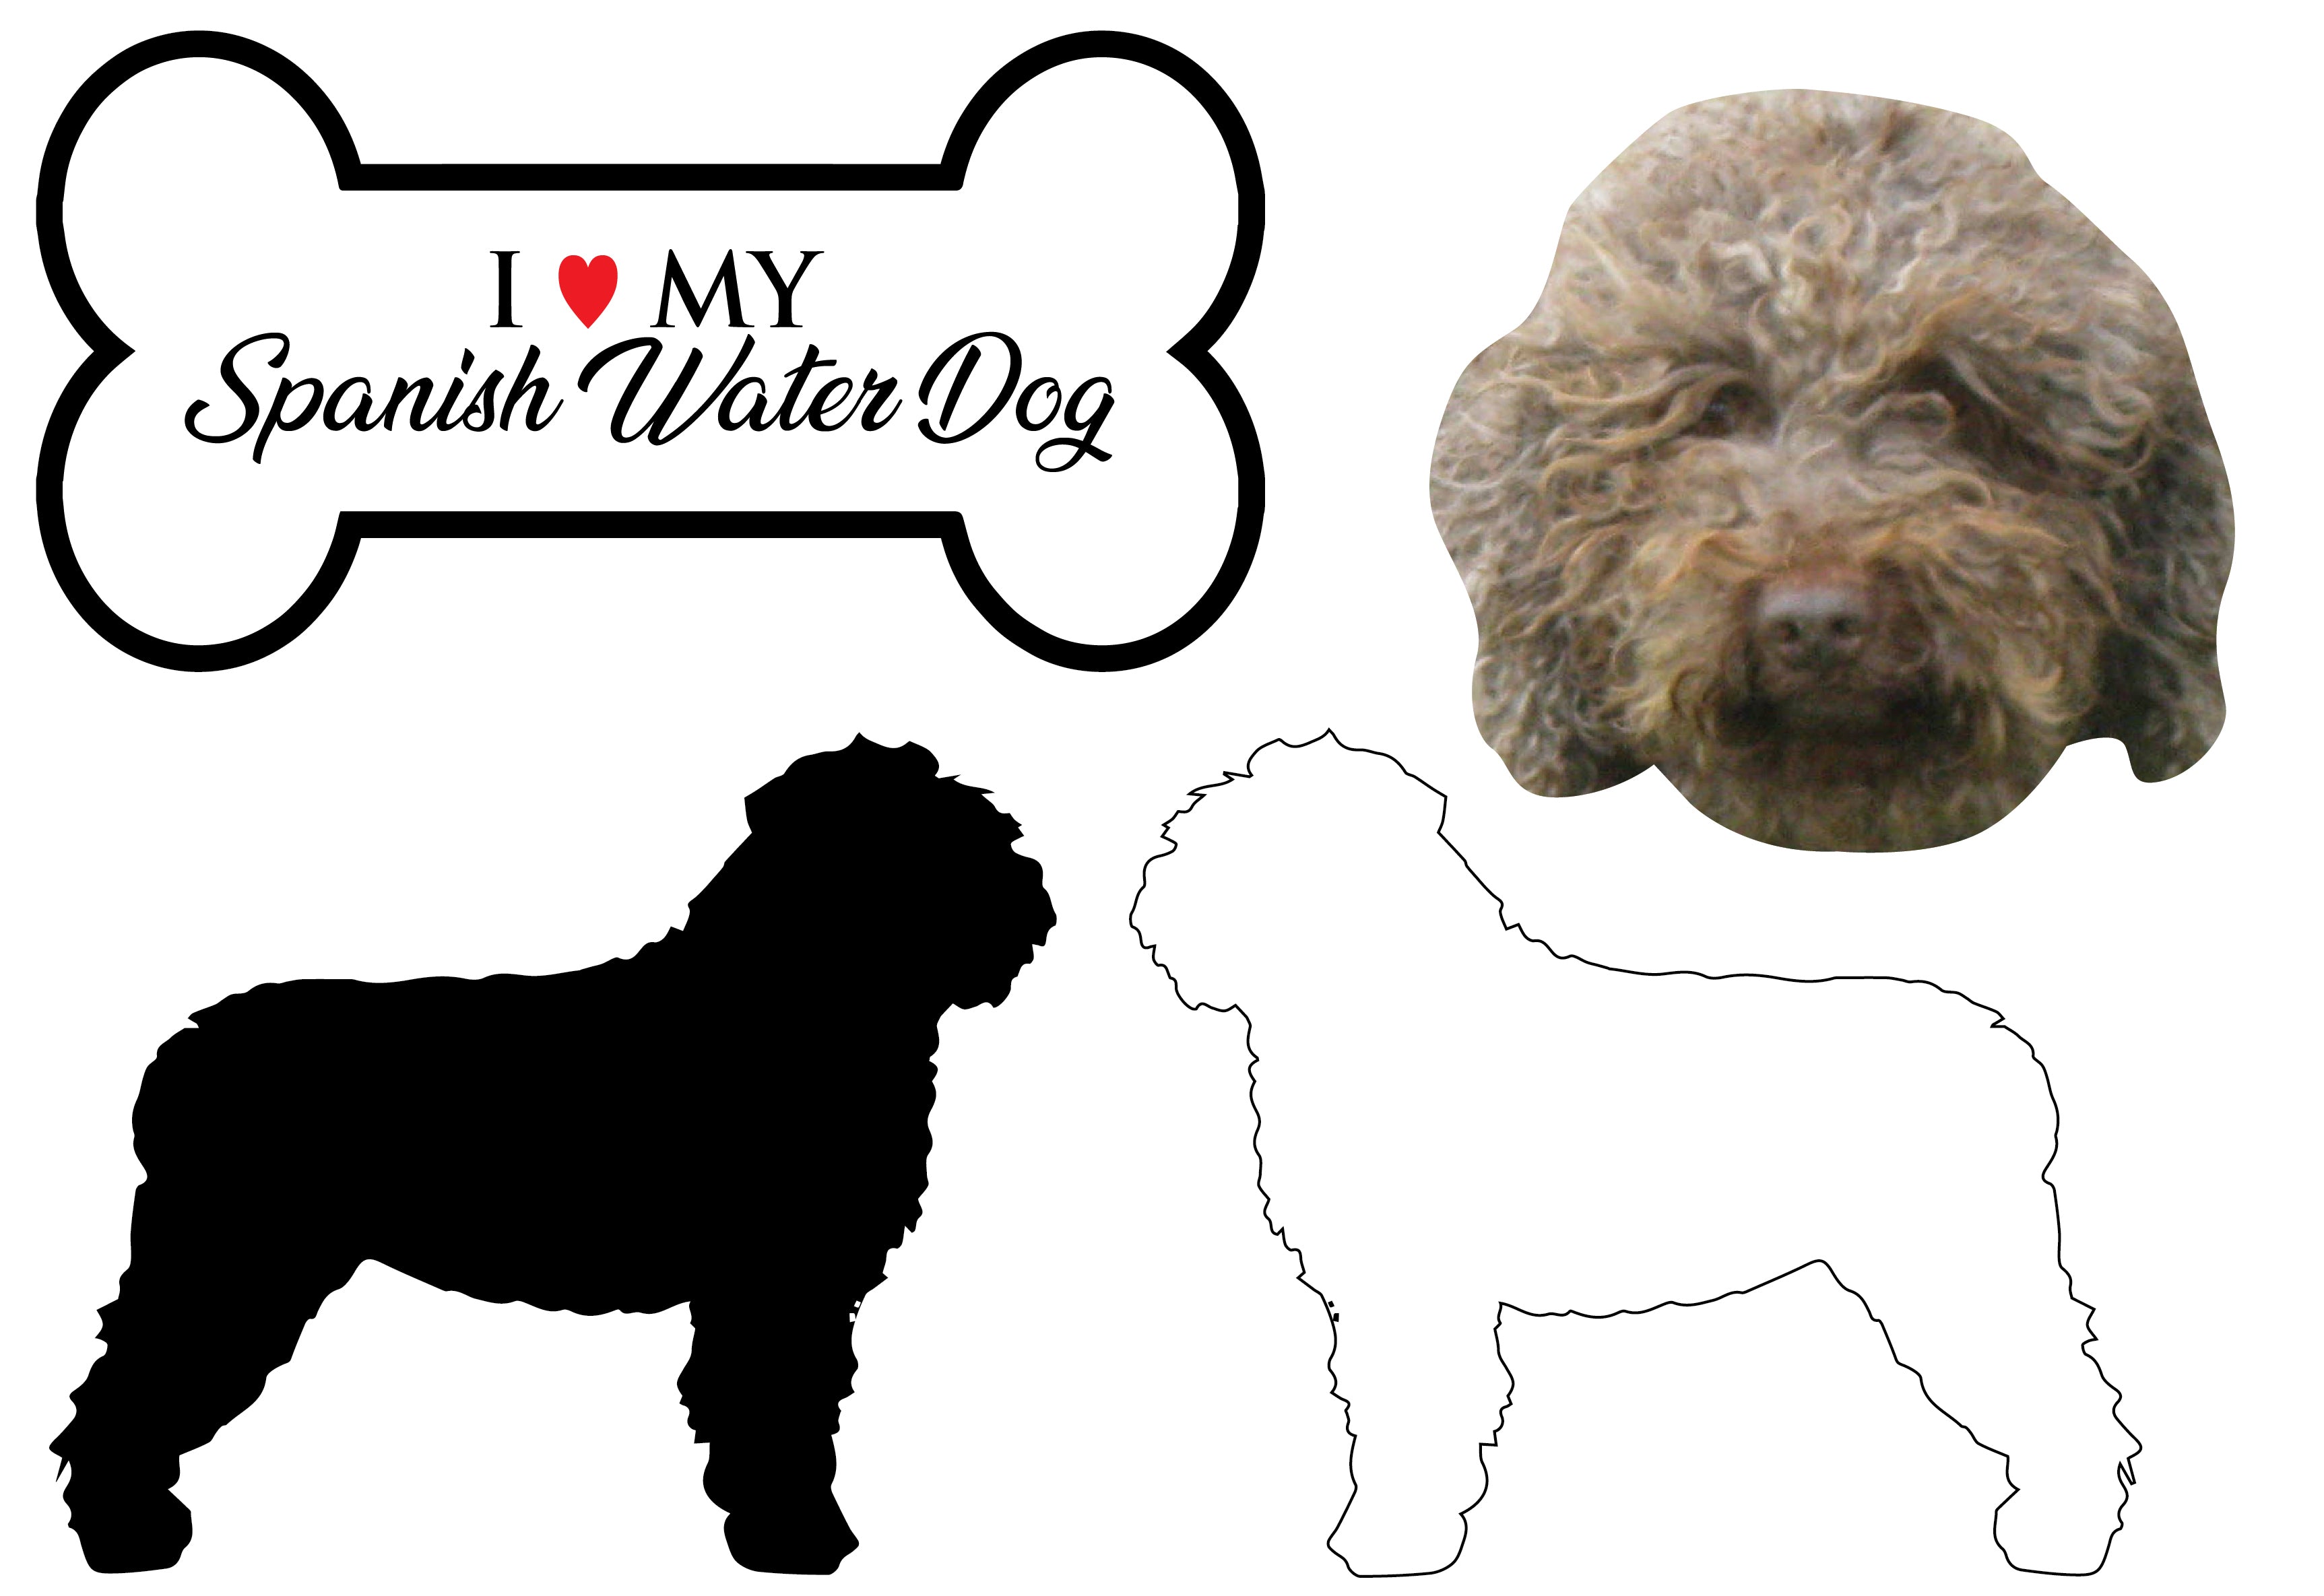 Spanish Water Dog - Dog Breed Decals (Set of 16) - Sizes in Description